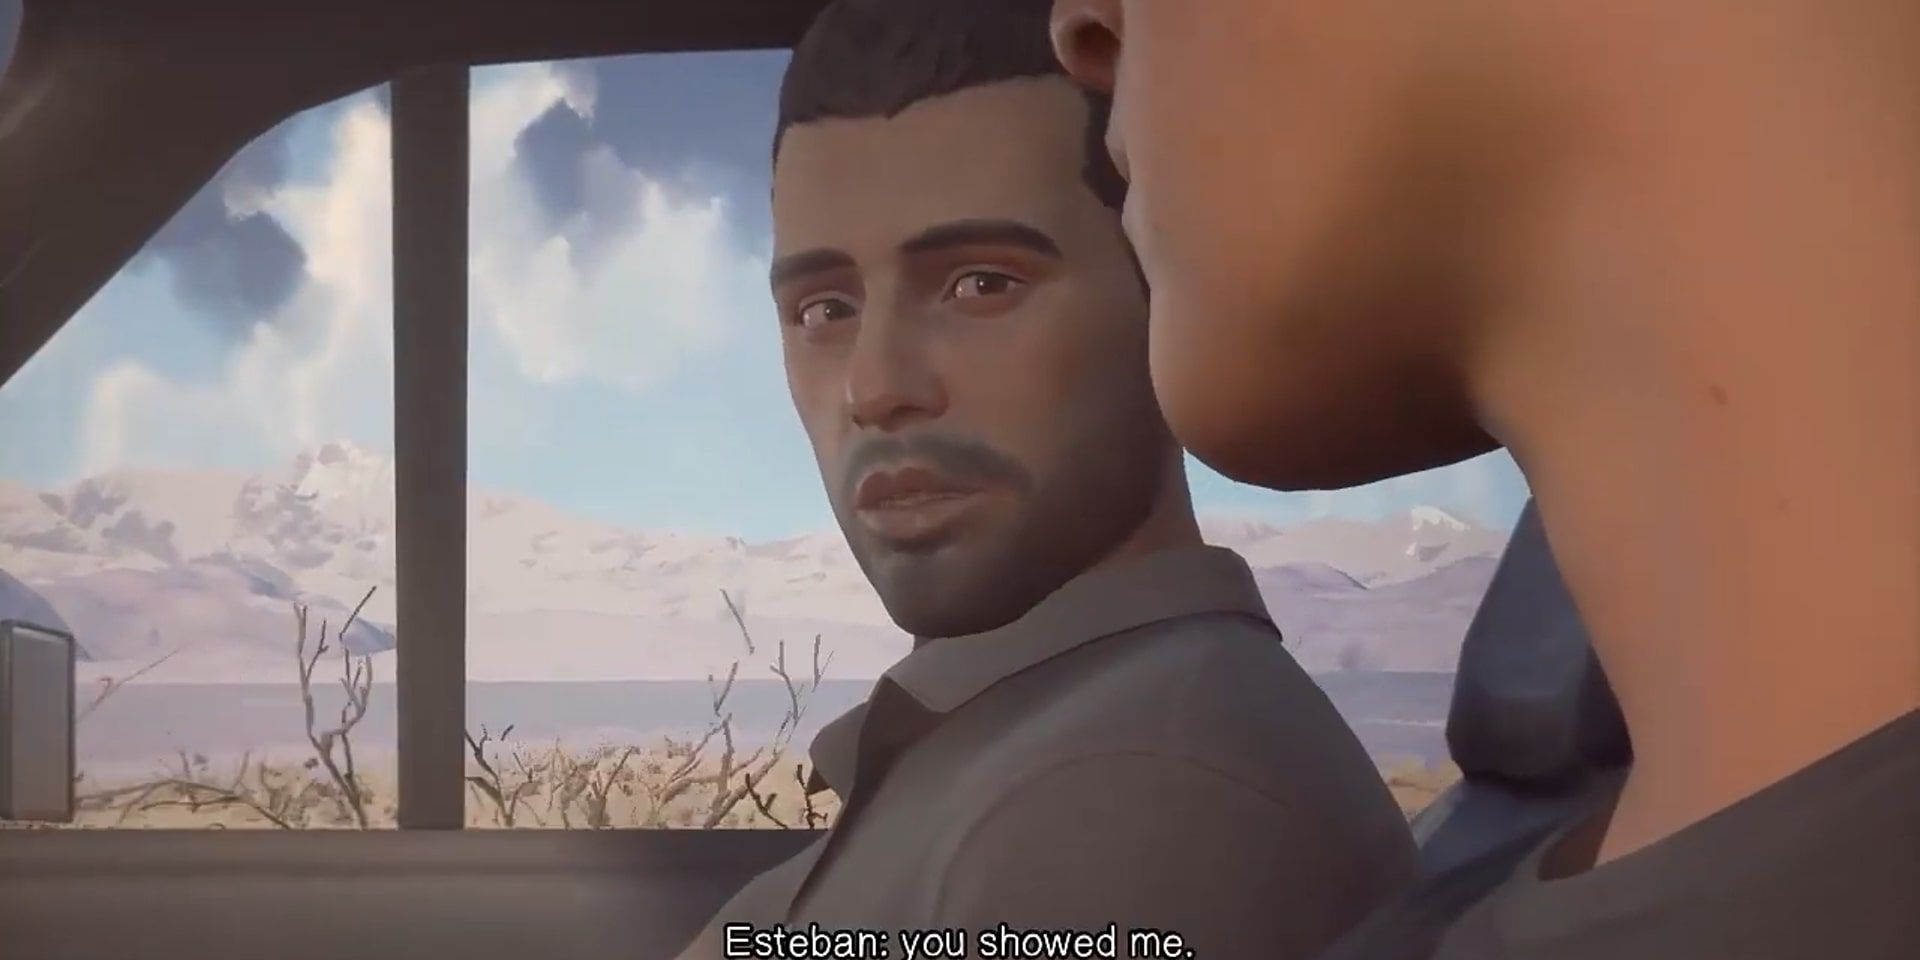 Sean driving on the road while his dad offers him loving words in a poignant dream sequence in Life is Strange 2.